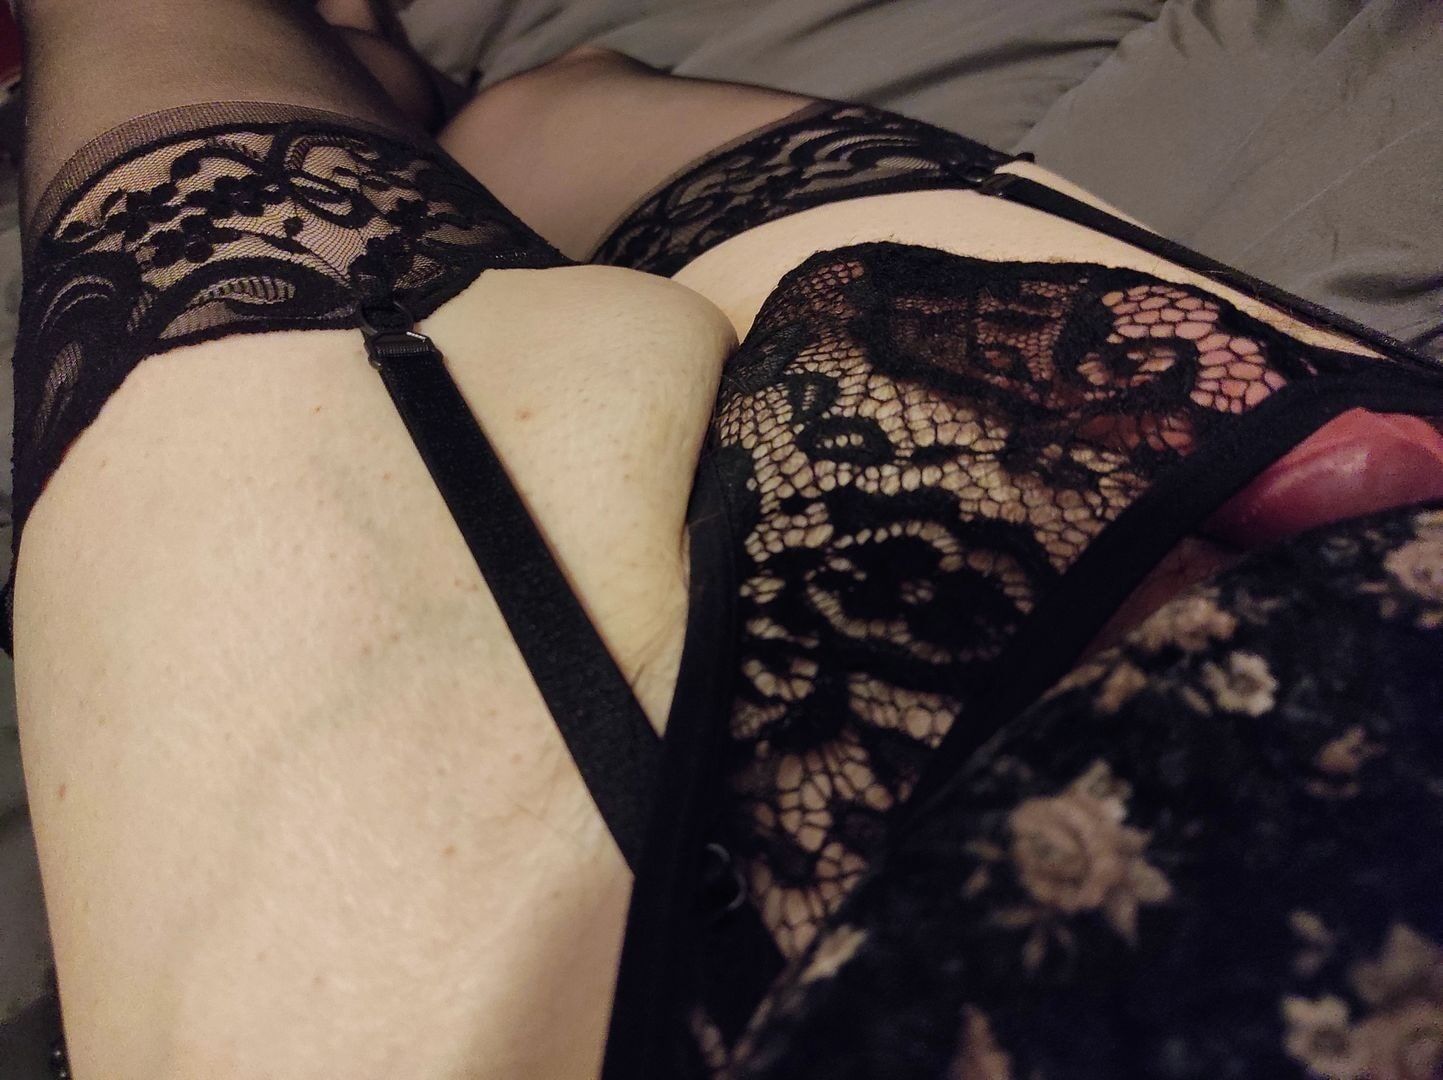 Just me in lingerie... #20